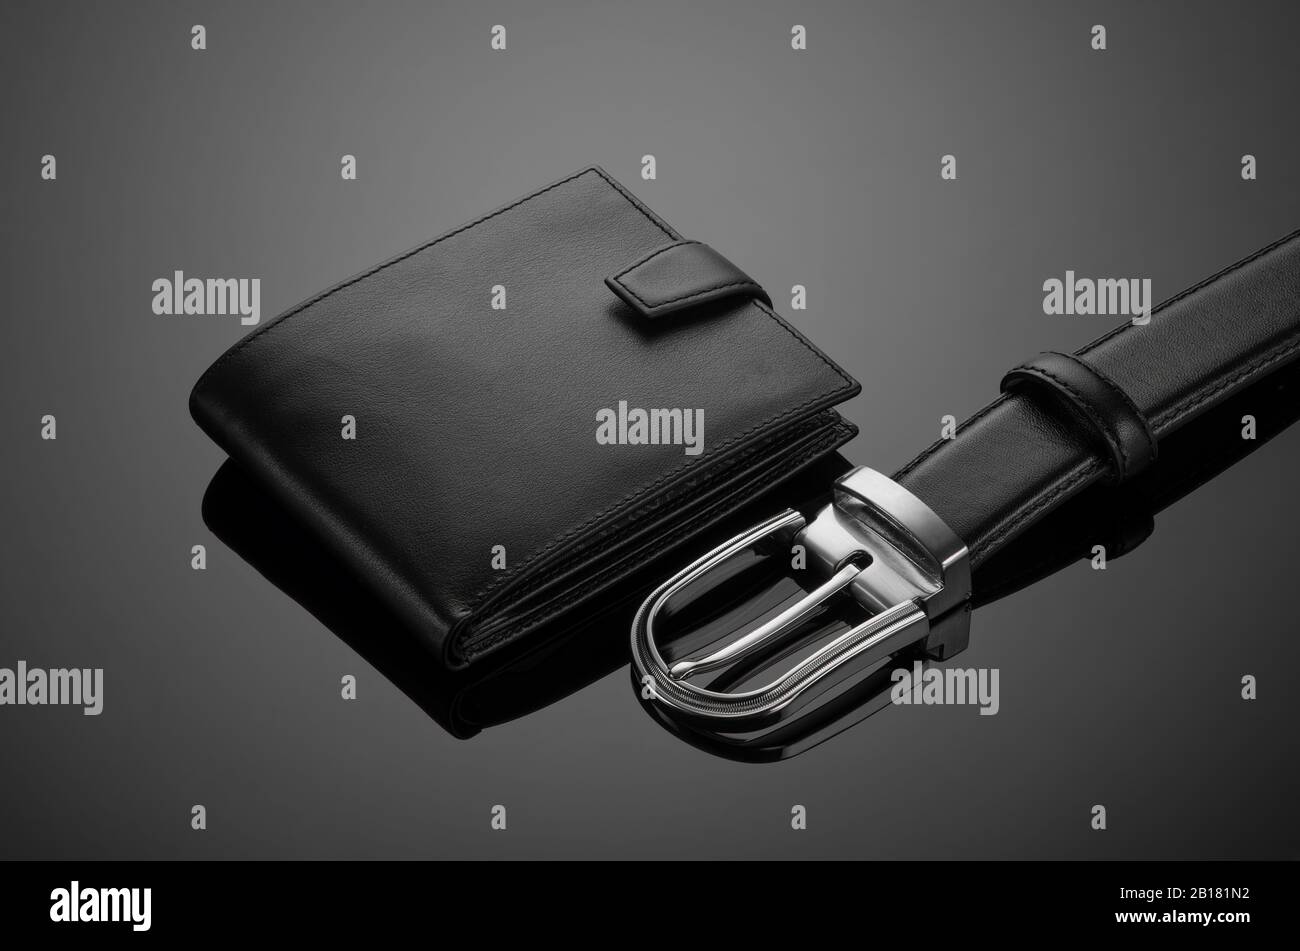 Fashionable leather men's wallet and belt on a black background Stock Photo